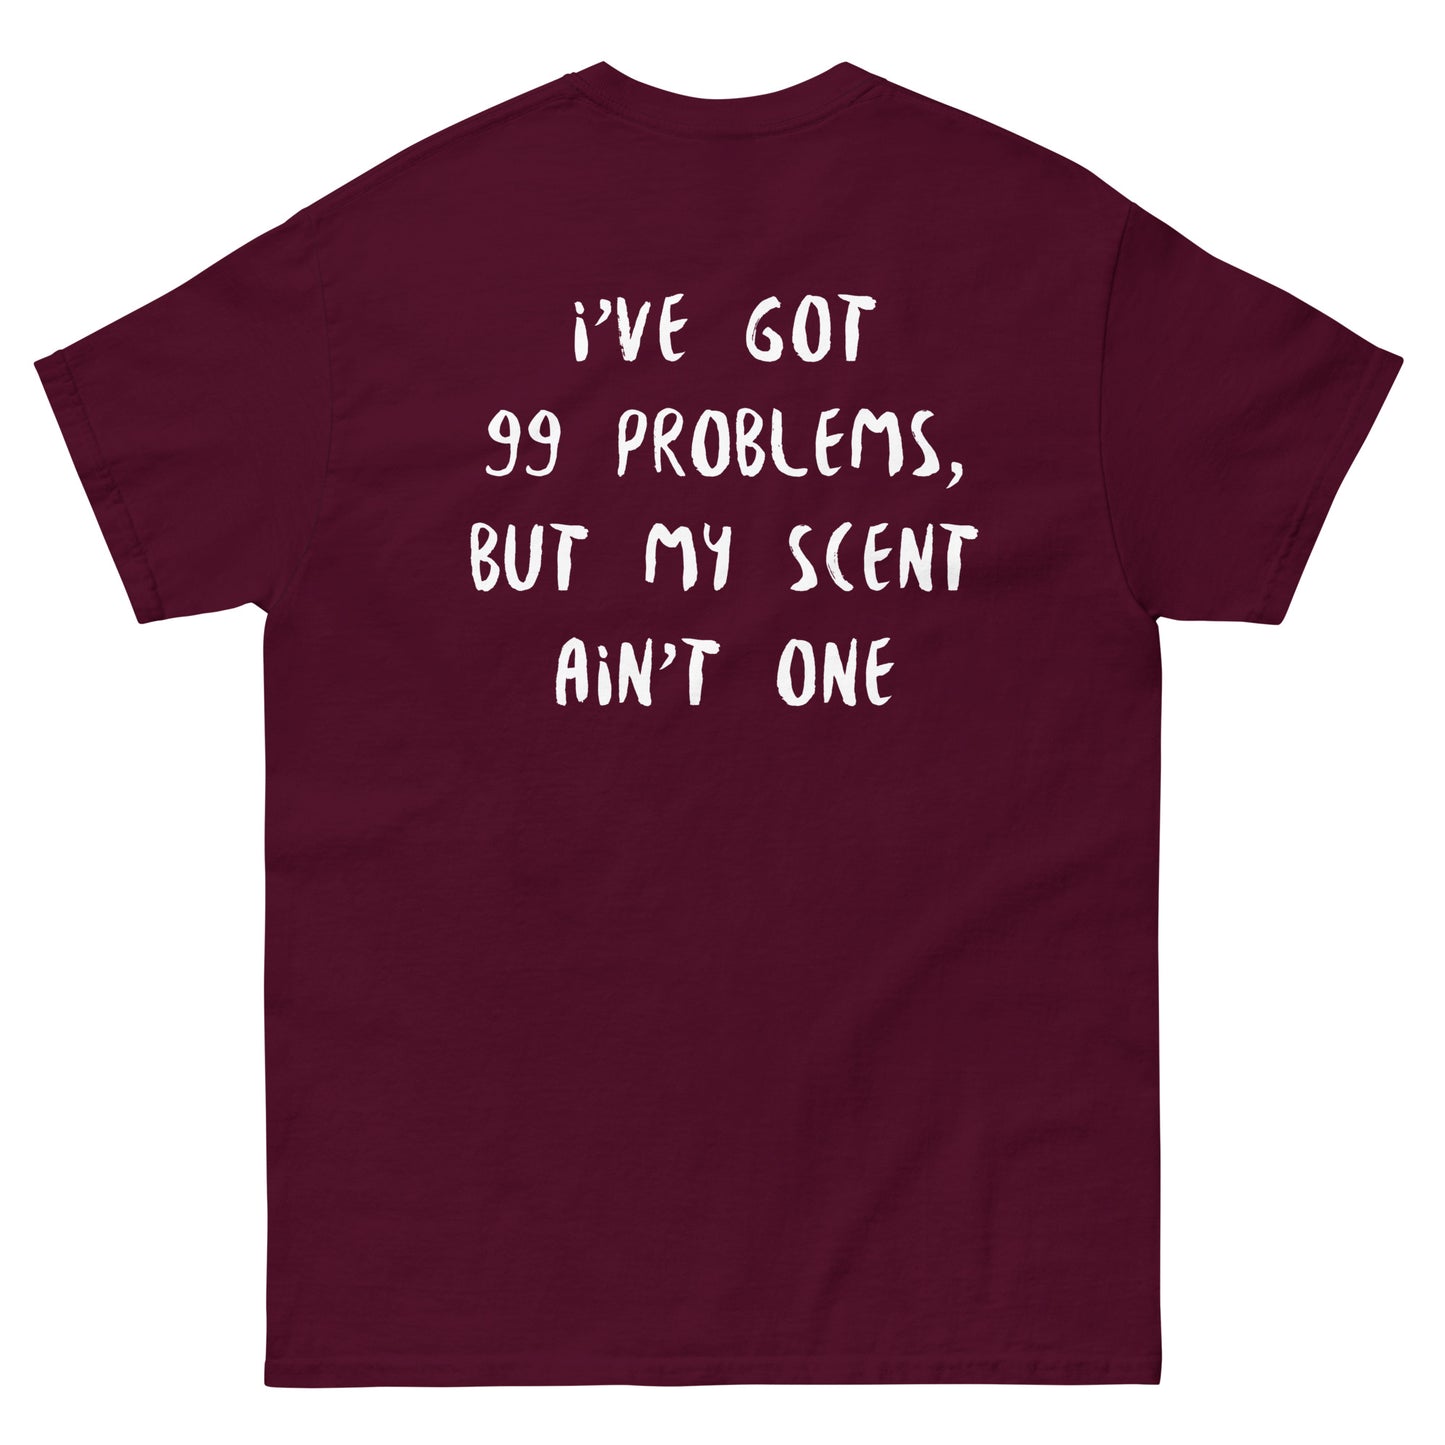 I've Got 99 Problems, but My Scent Ain't One - Shirt